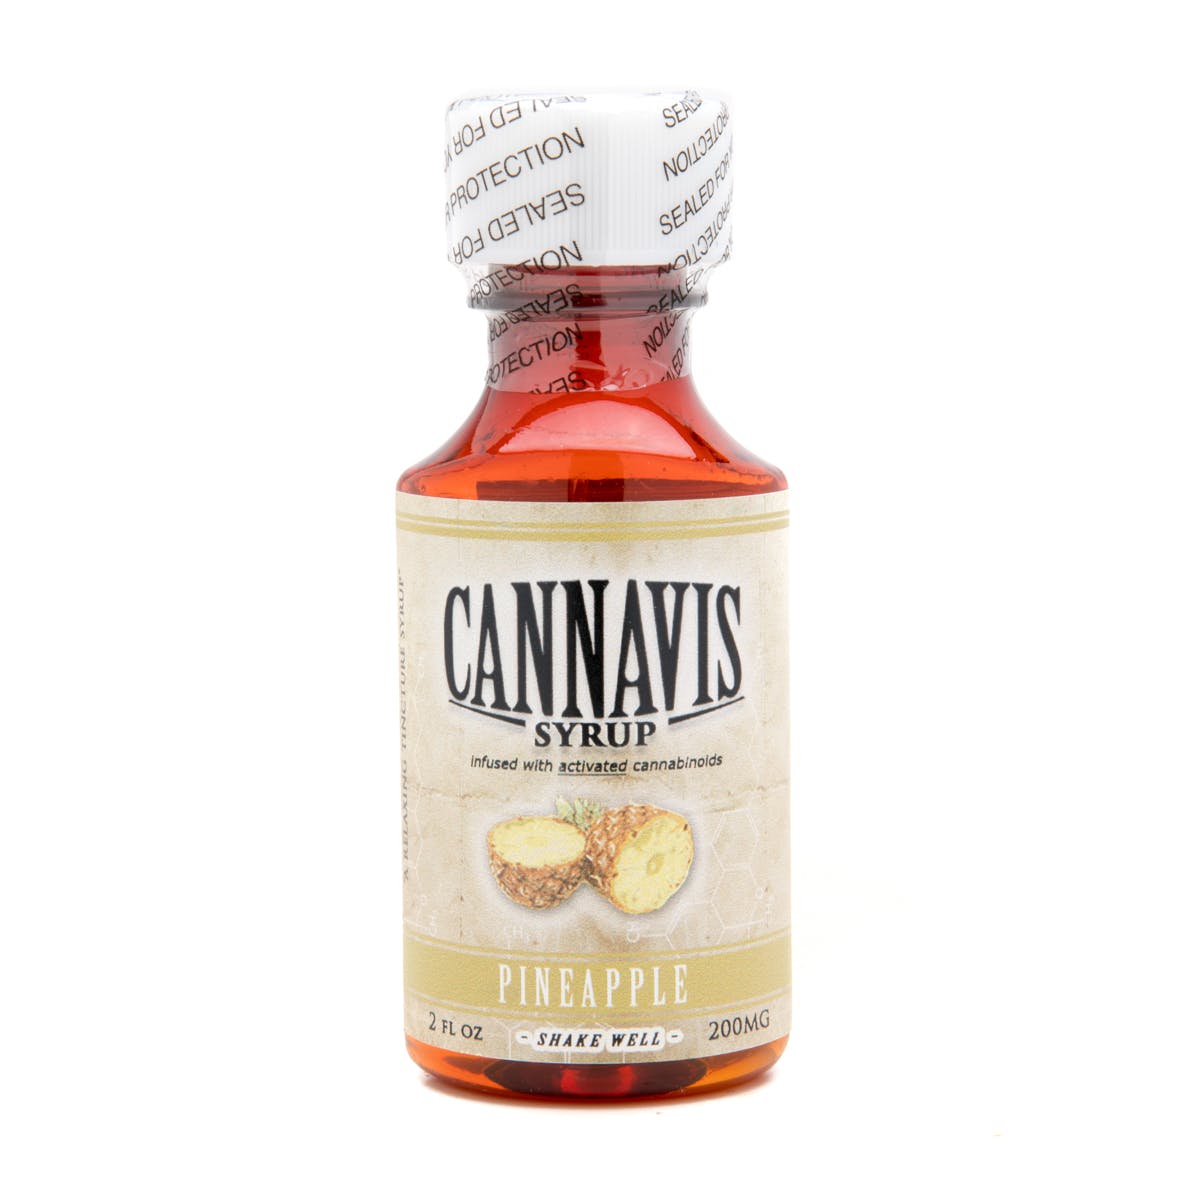 marijuana-dispensaries-church-of-holy-fire-in-city-of-industry-cannavis-syrup-2c-pineapple-200mg